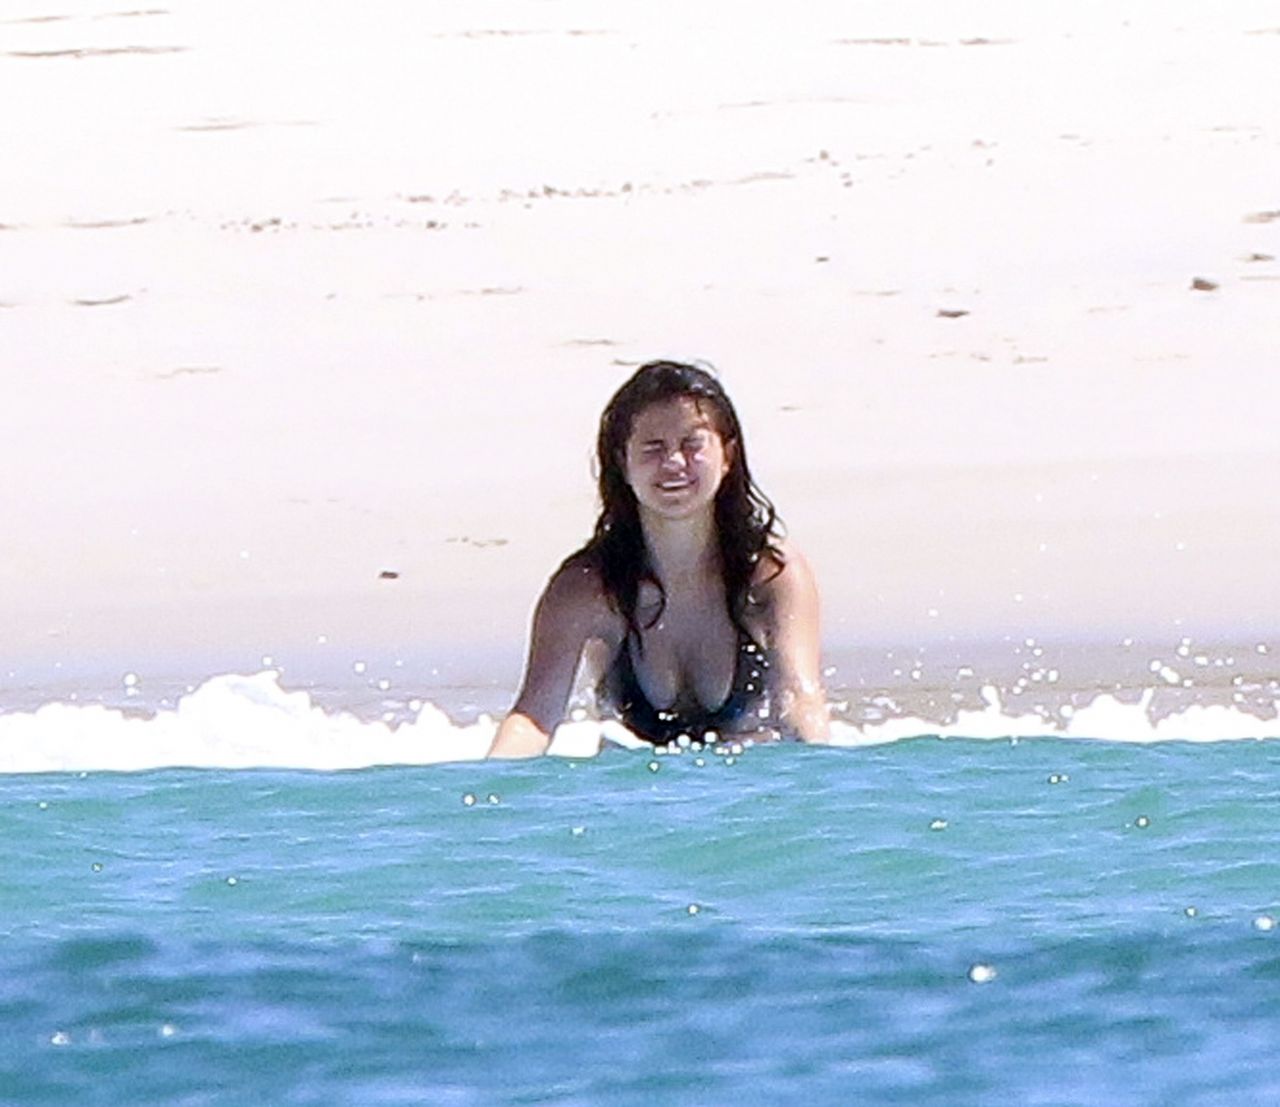 Selena Gomez Hot in Swimsuit at a Beach in Mexico, April 2015.